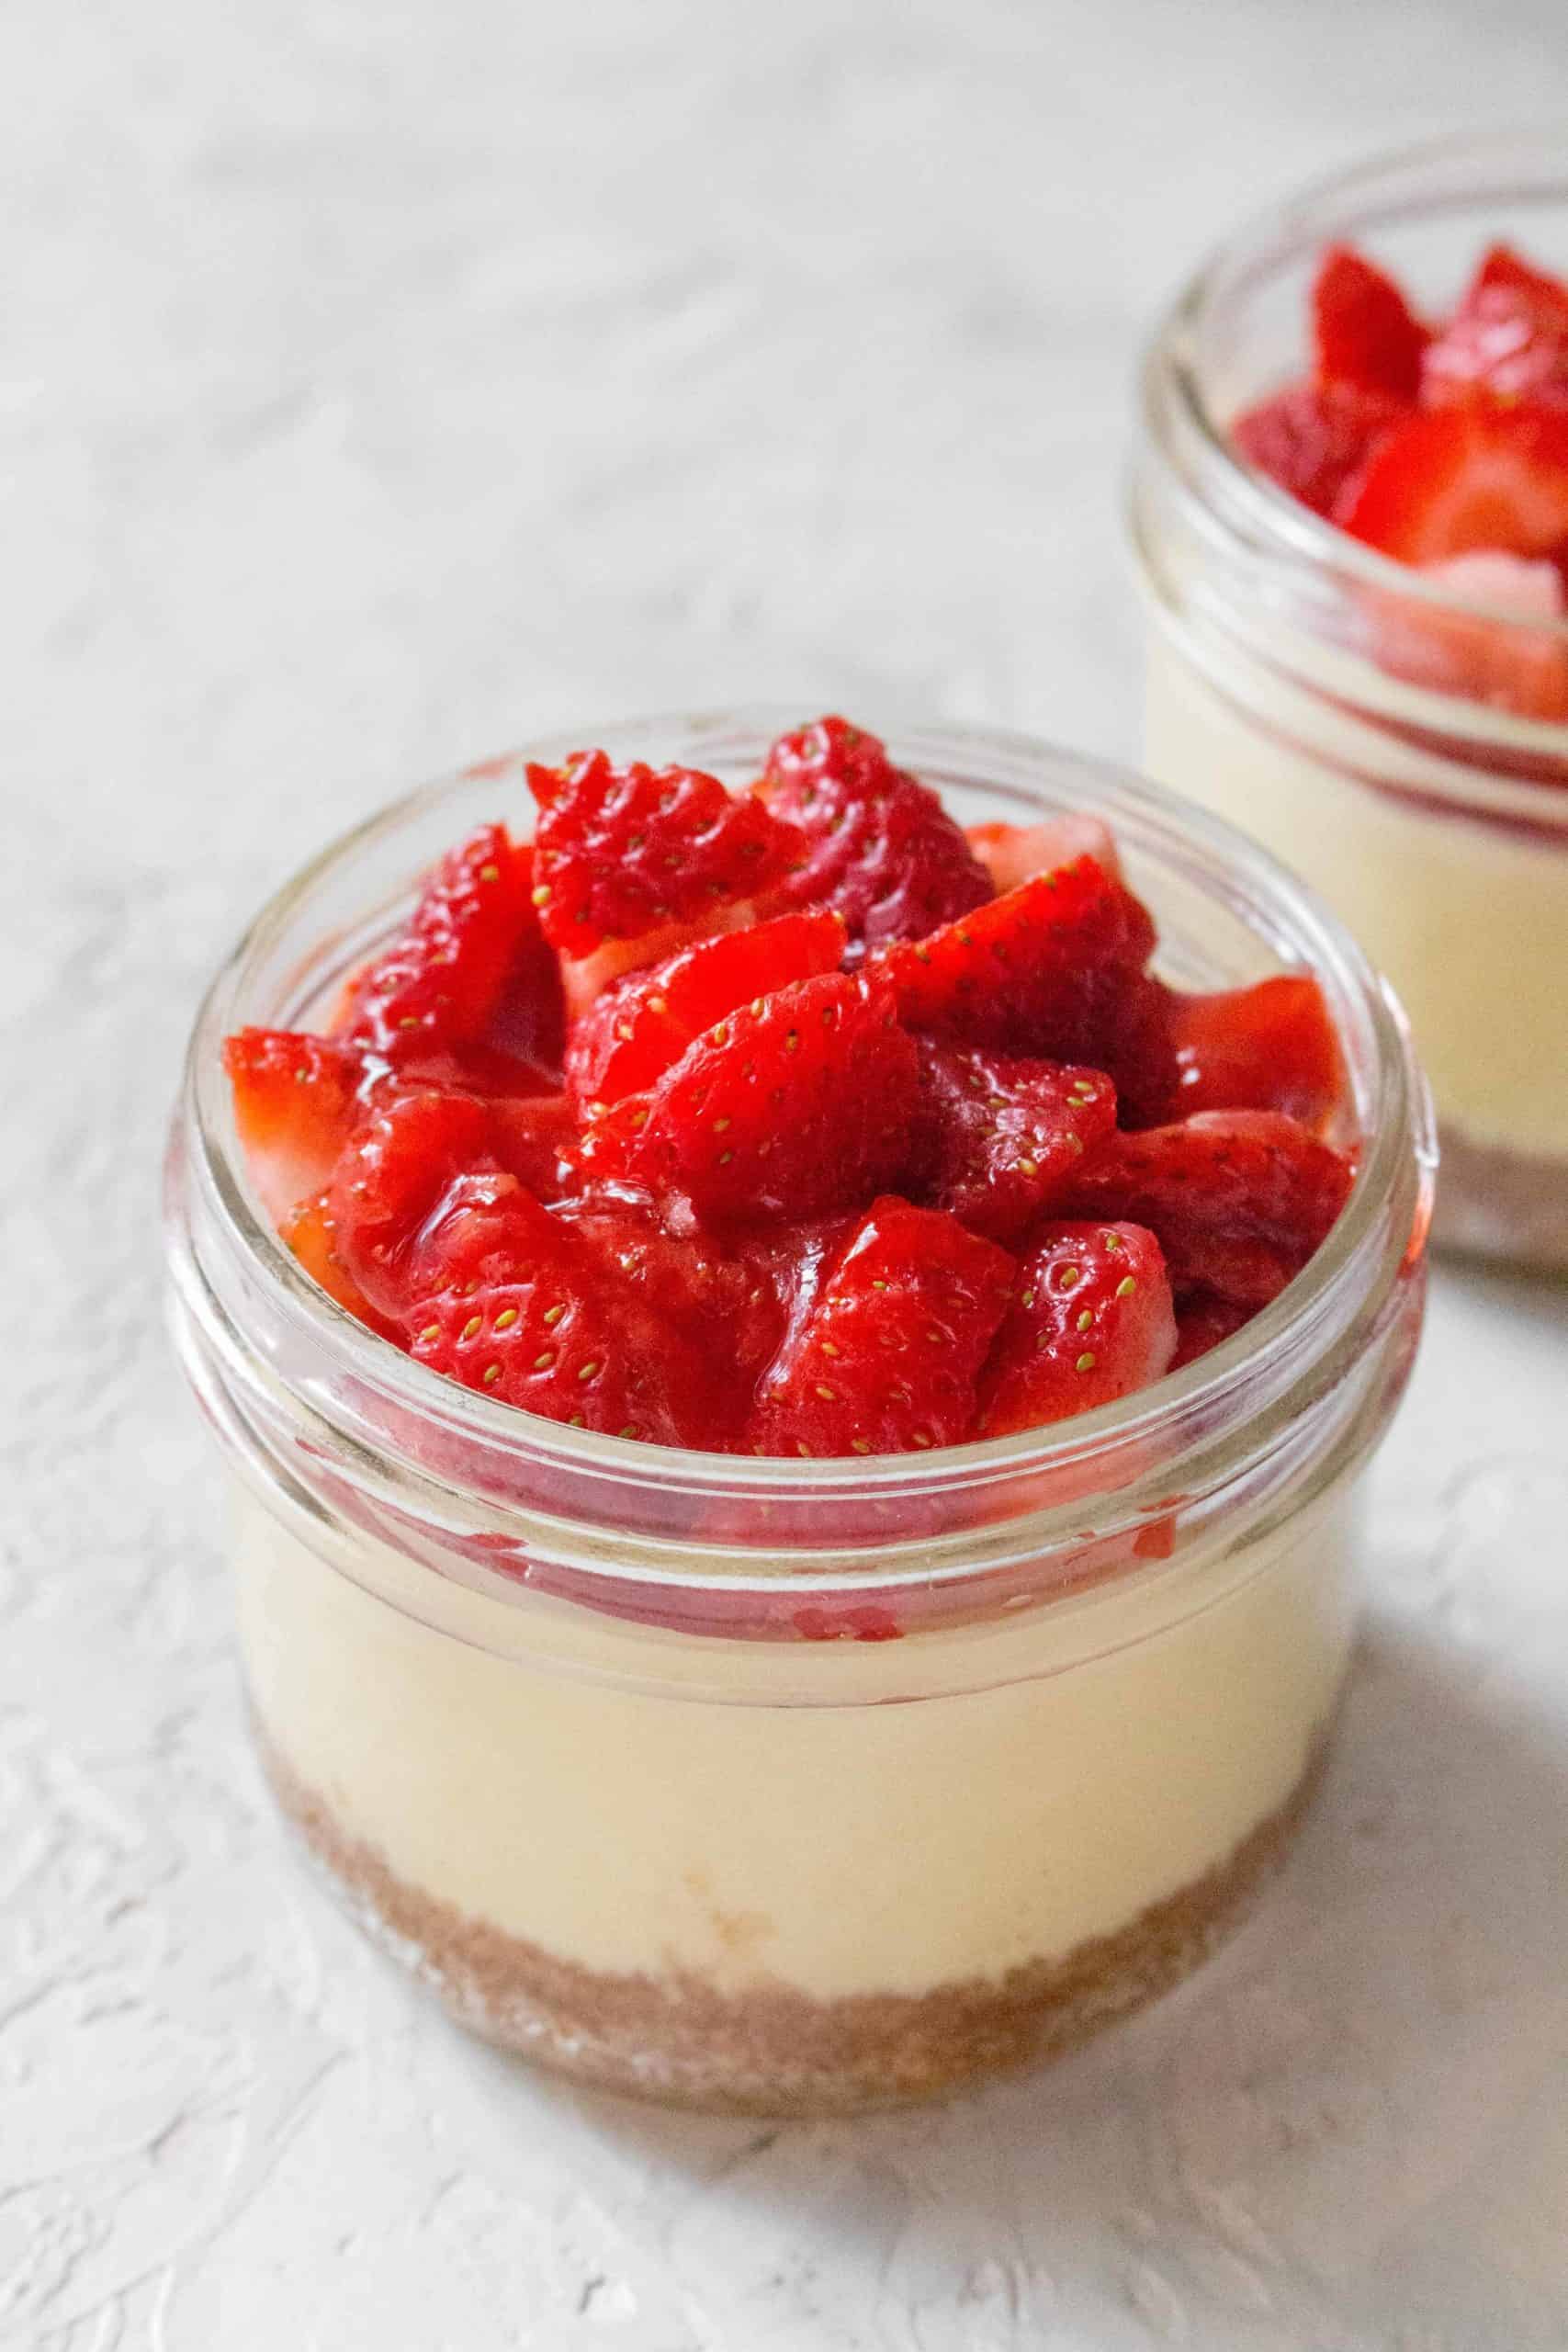 https://onepotonly.com/wp-content/uploads/2019/12/strawberry-cheesecake-12-scaled.jpg